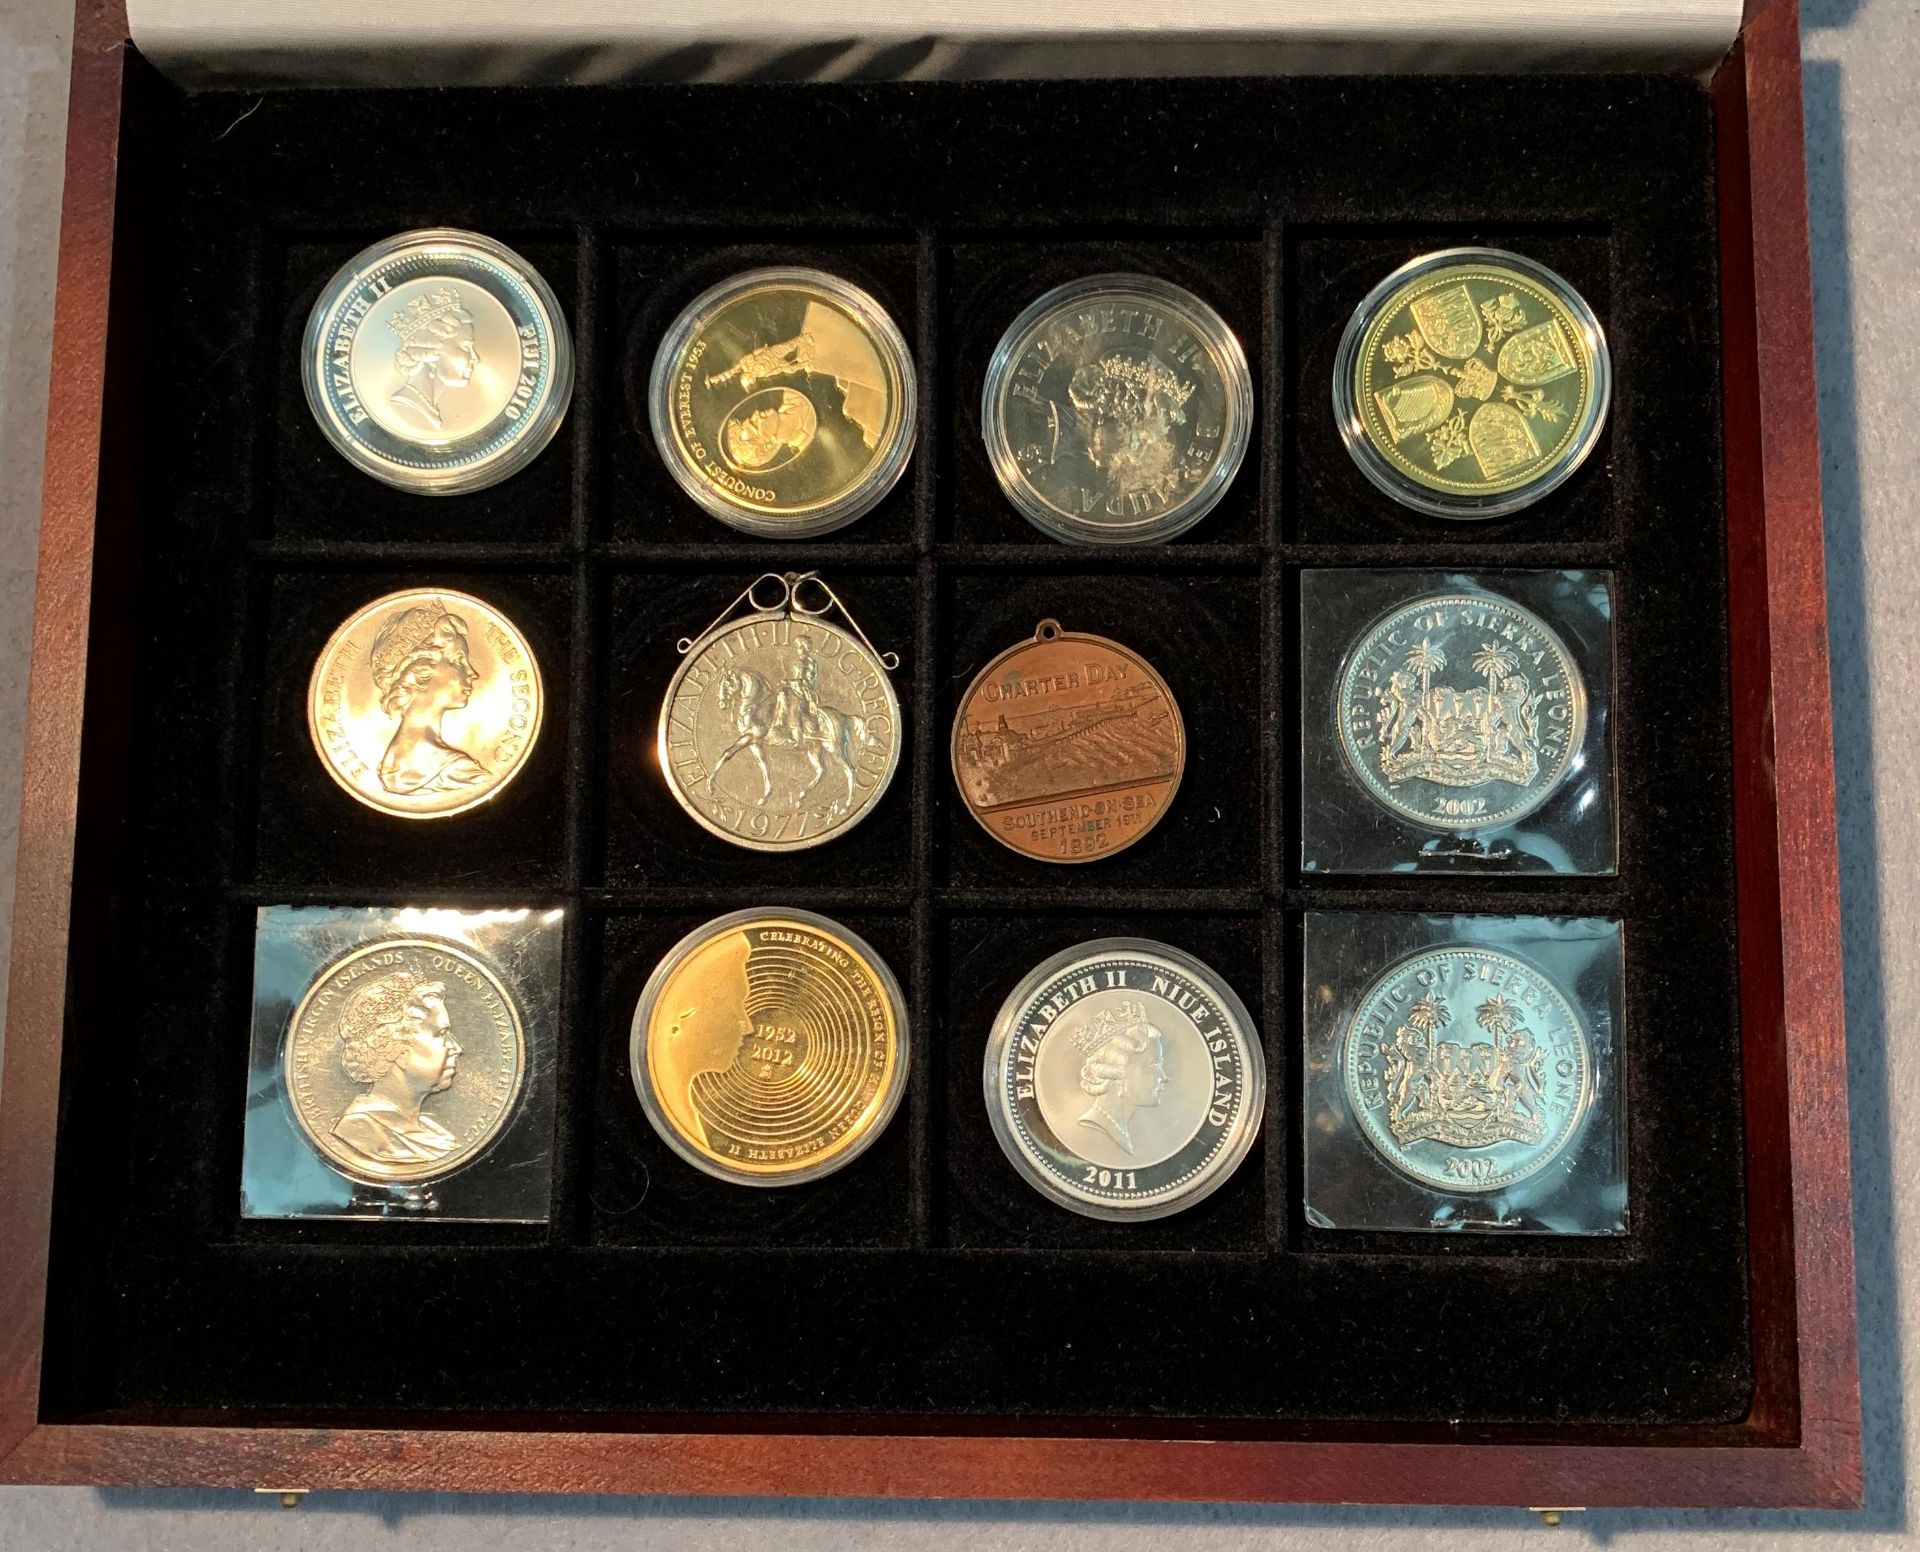 Contents to wooden box - twelve GB and Commonwealth crowns